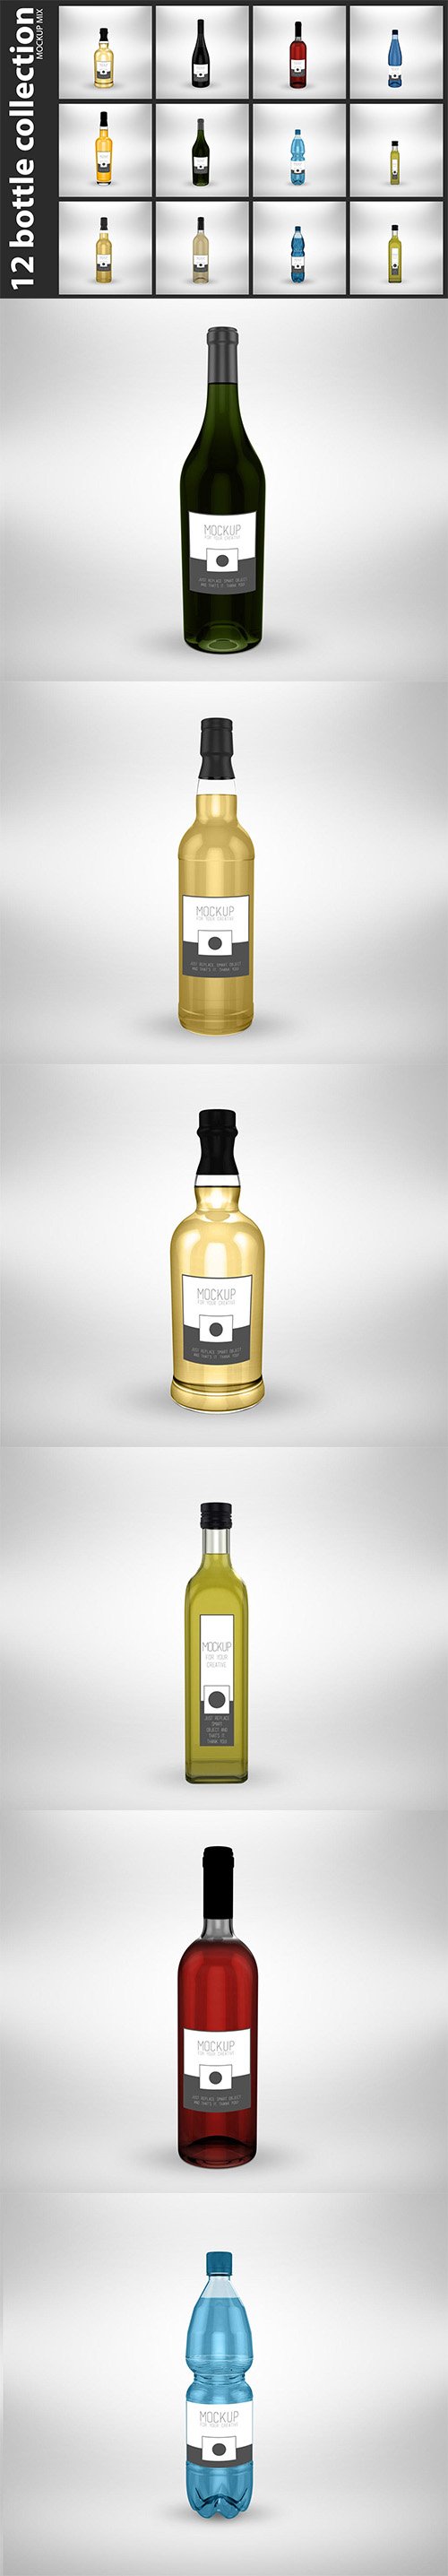 12 Bottle Collection PSD Mock Up